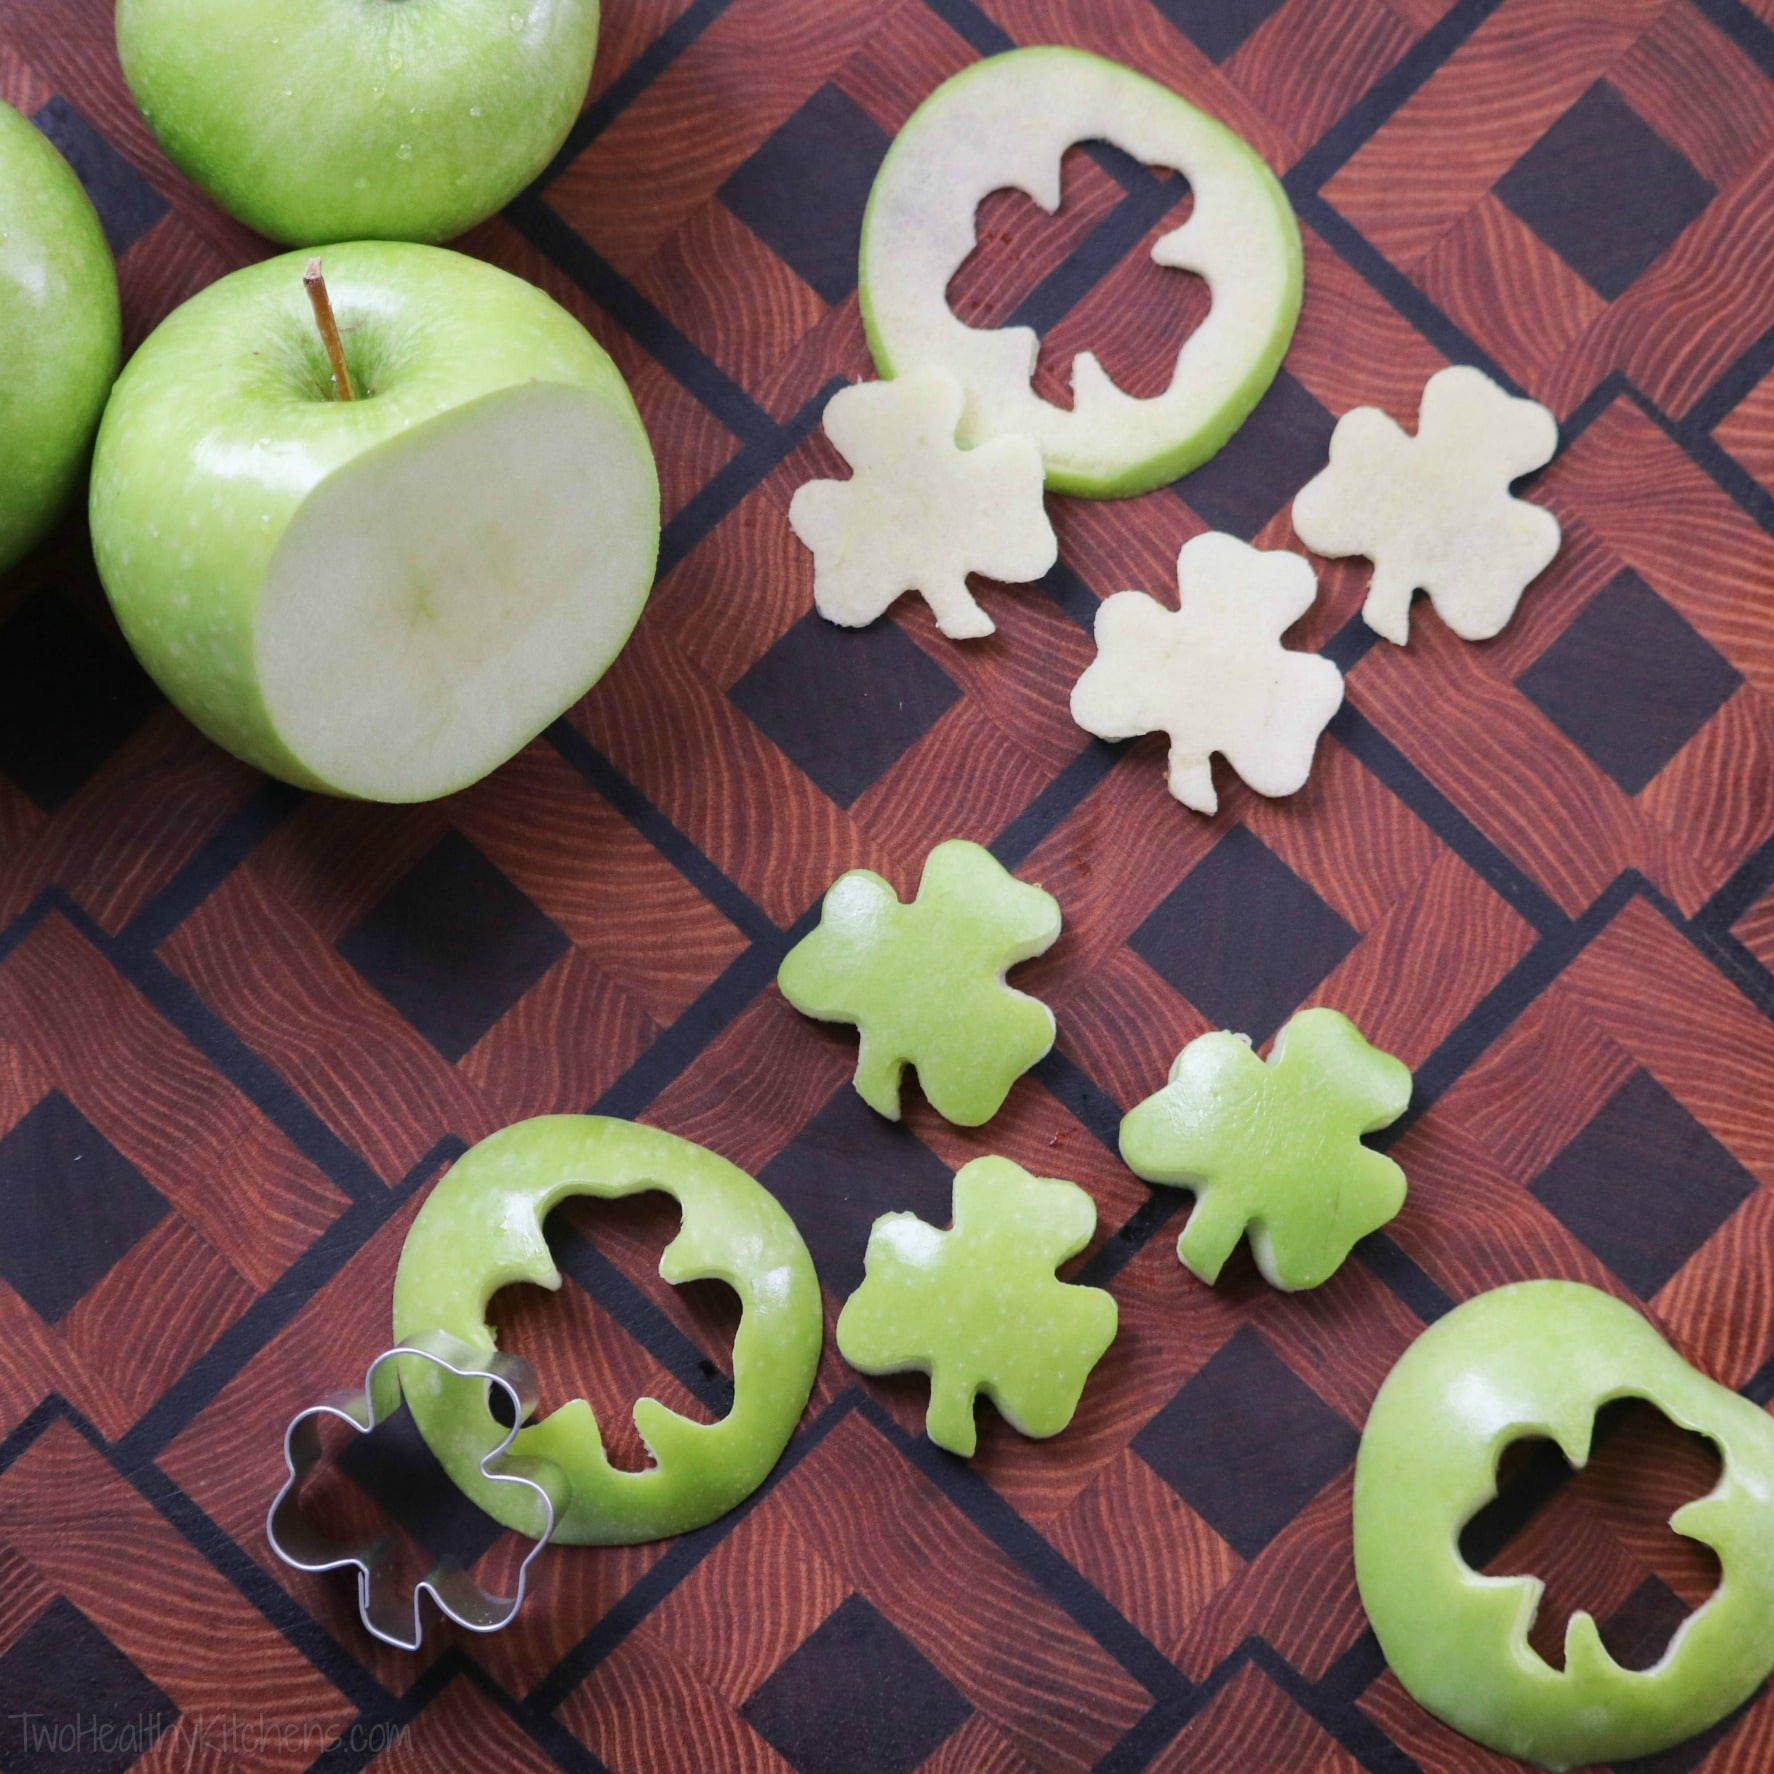 Green apples on patterned-wood cutting board, sliced and cut into shamrocks using cooking cutter.